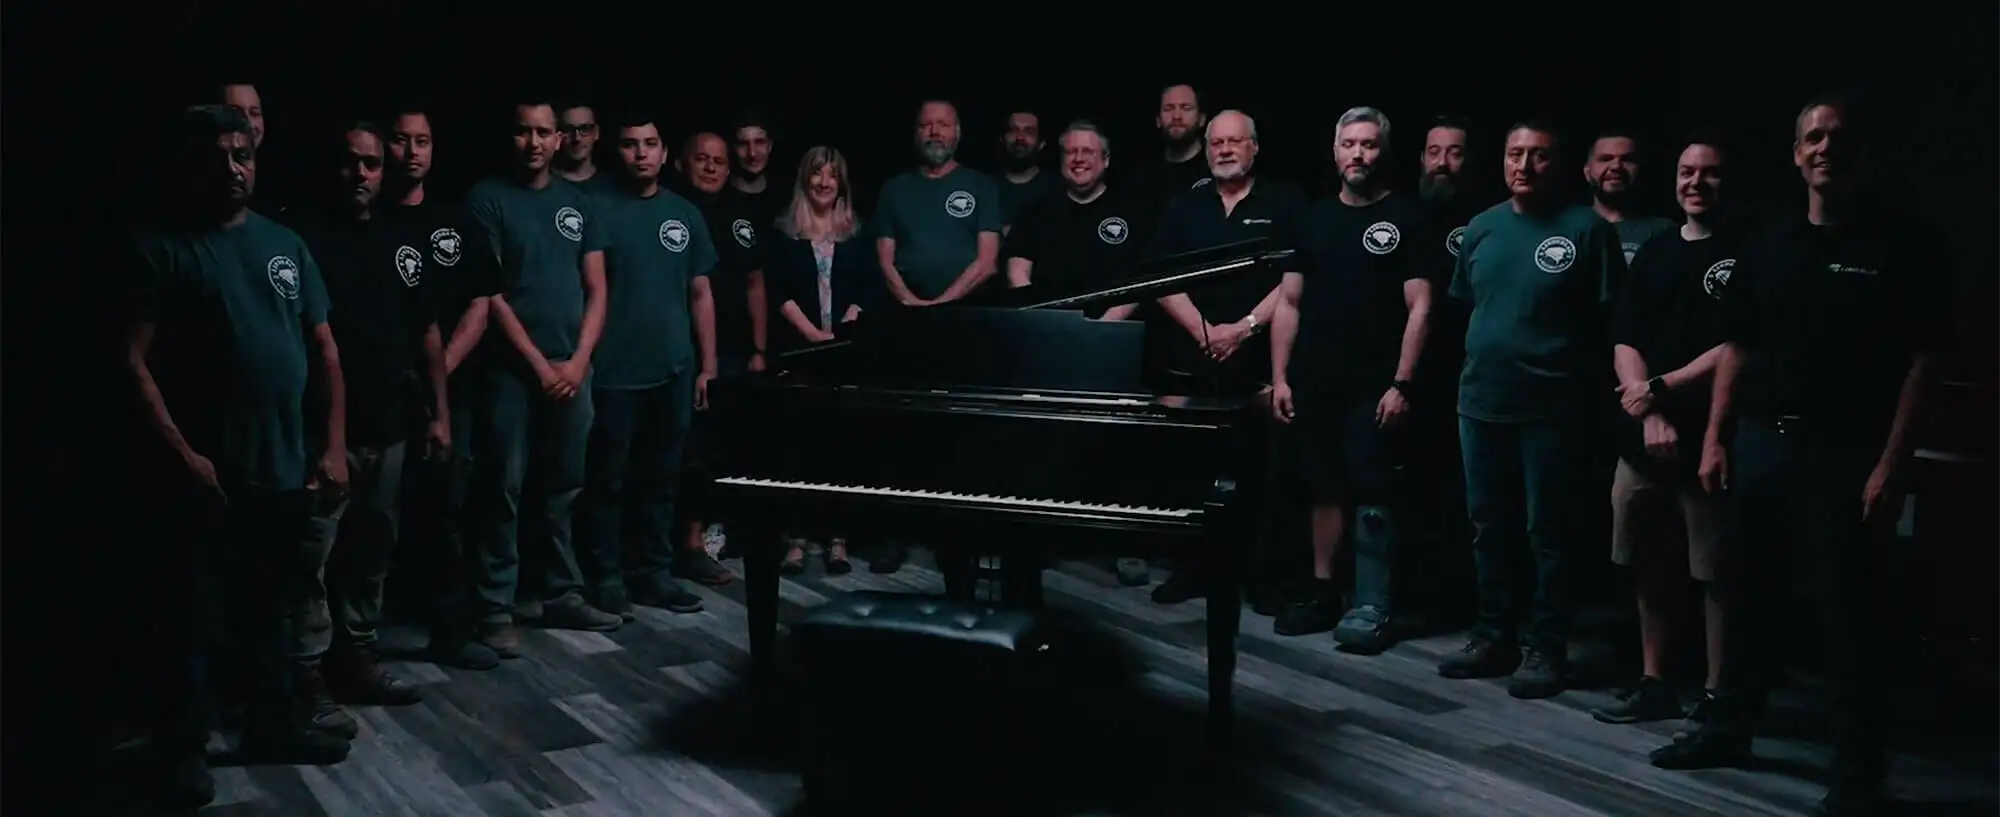 Lindeblad Piano's team, with 25 craftsmen and 10 admin, together smiling around a piano, ready to serve families around the country